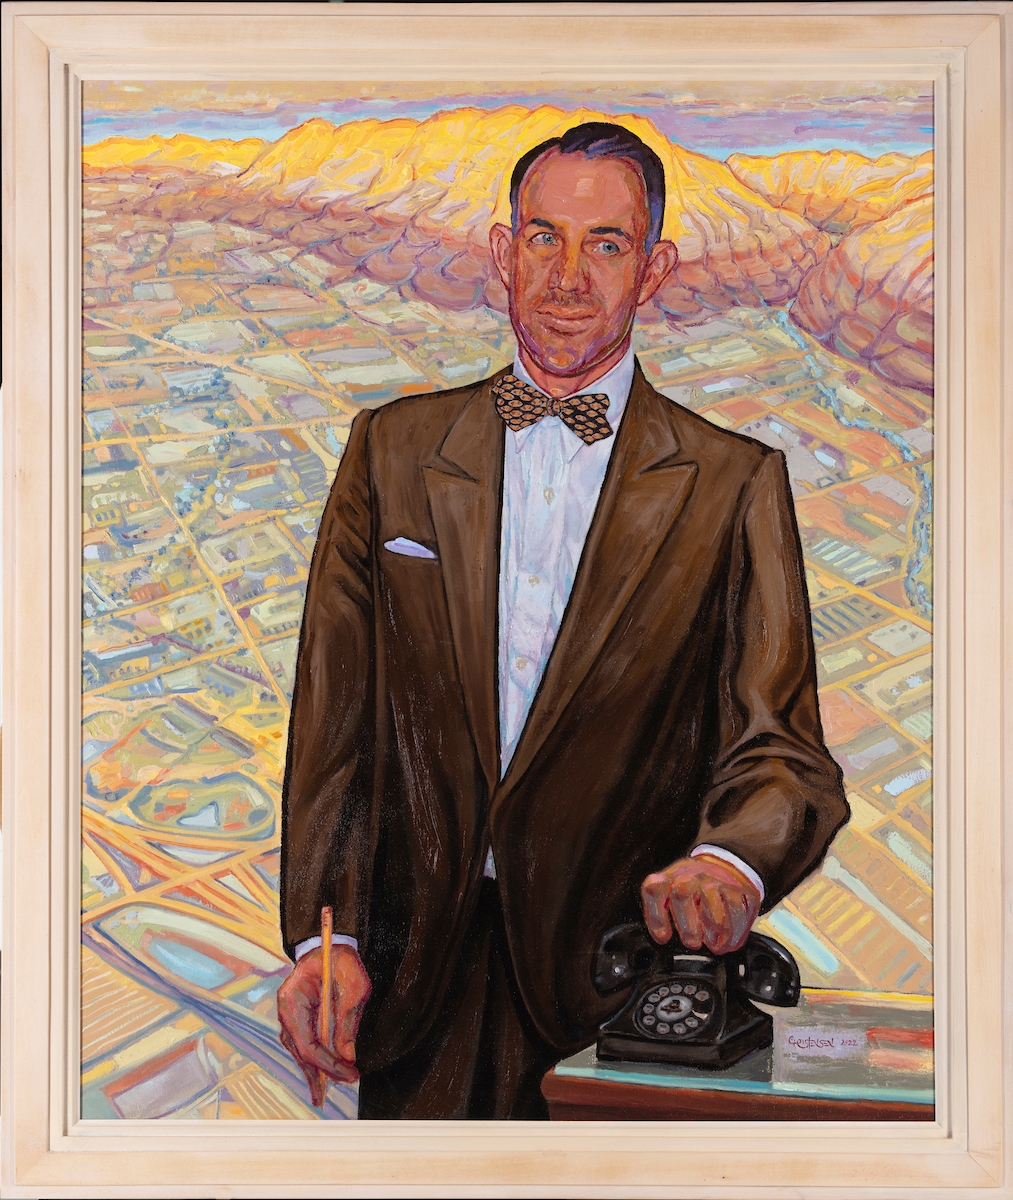 Portrait of Wilson W. Sorenson, painted by Kent Christensen. In the portrait Sorensen is depicted as standing at a desk, with his hand on a telephone receiver, with a stylized landscape of Utah valley in the background.